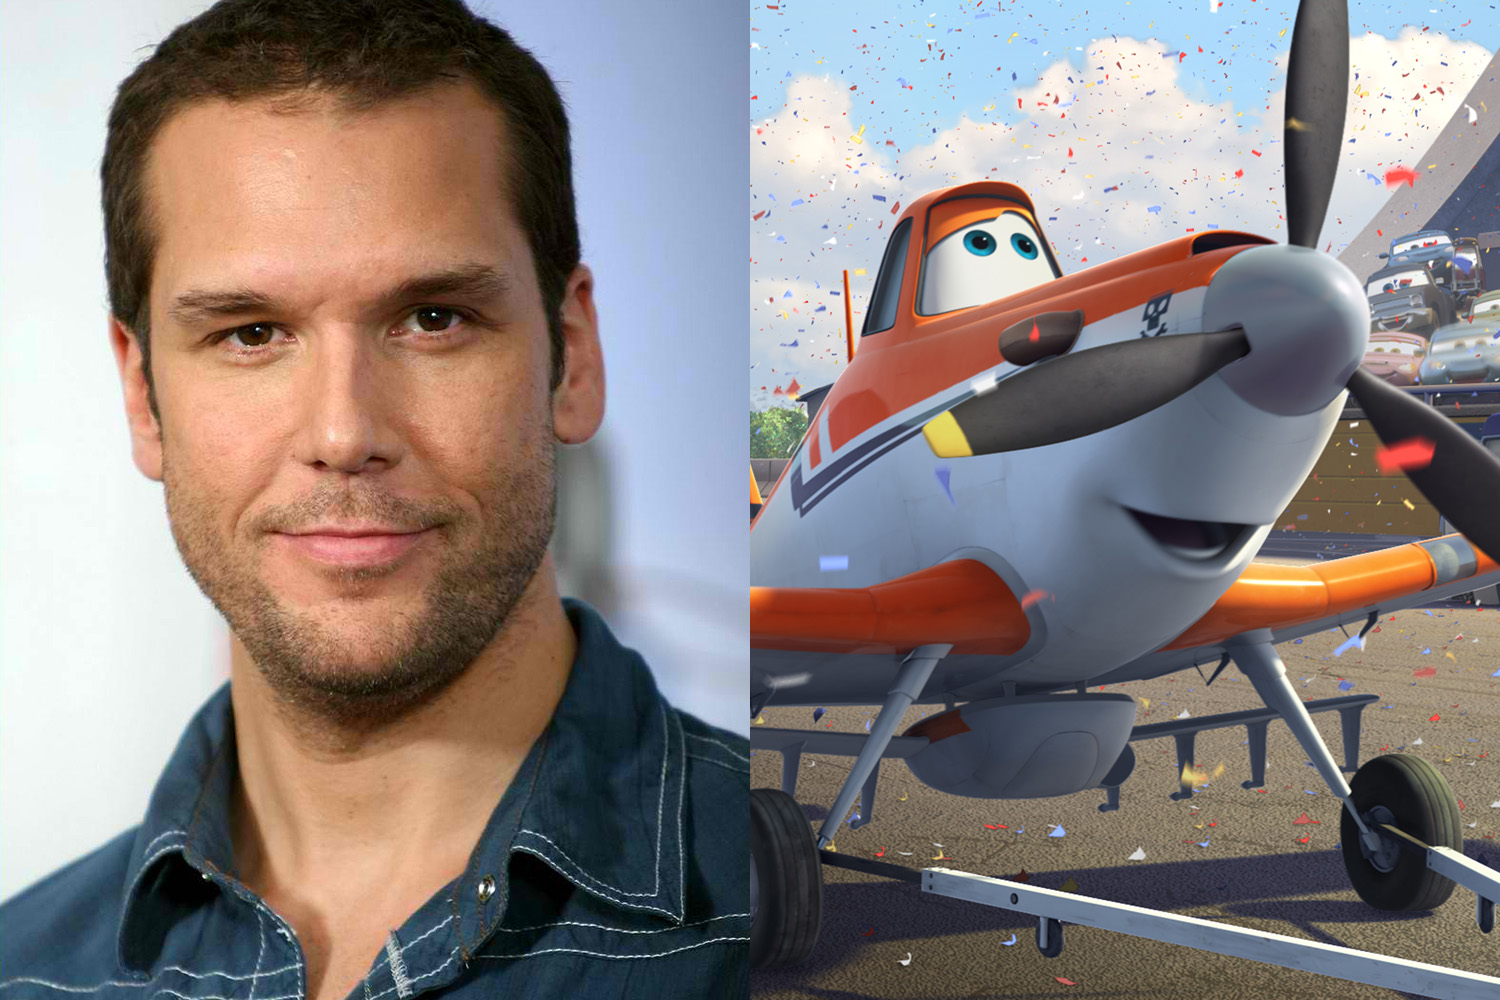 Dane Cook brings the lead character Dusty to life in "Disney’s Planes&...